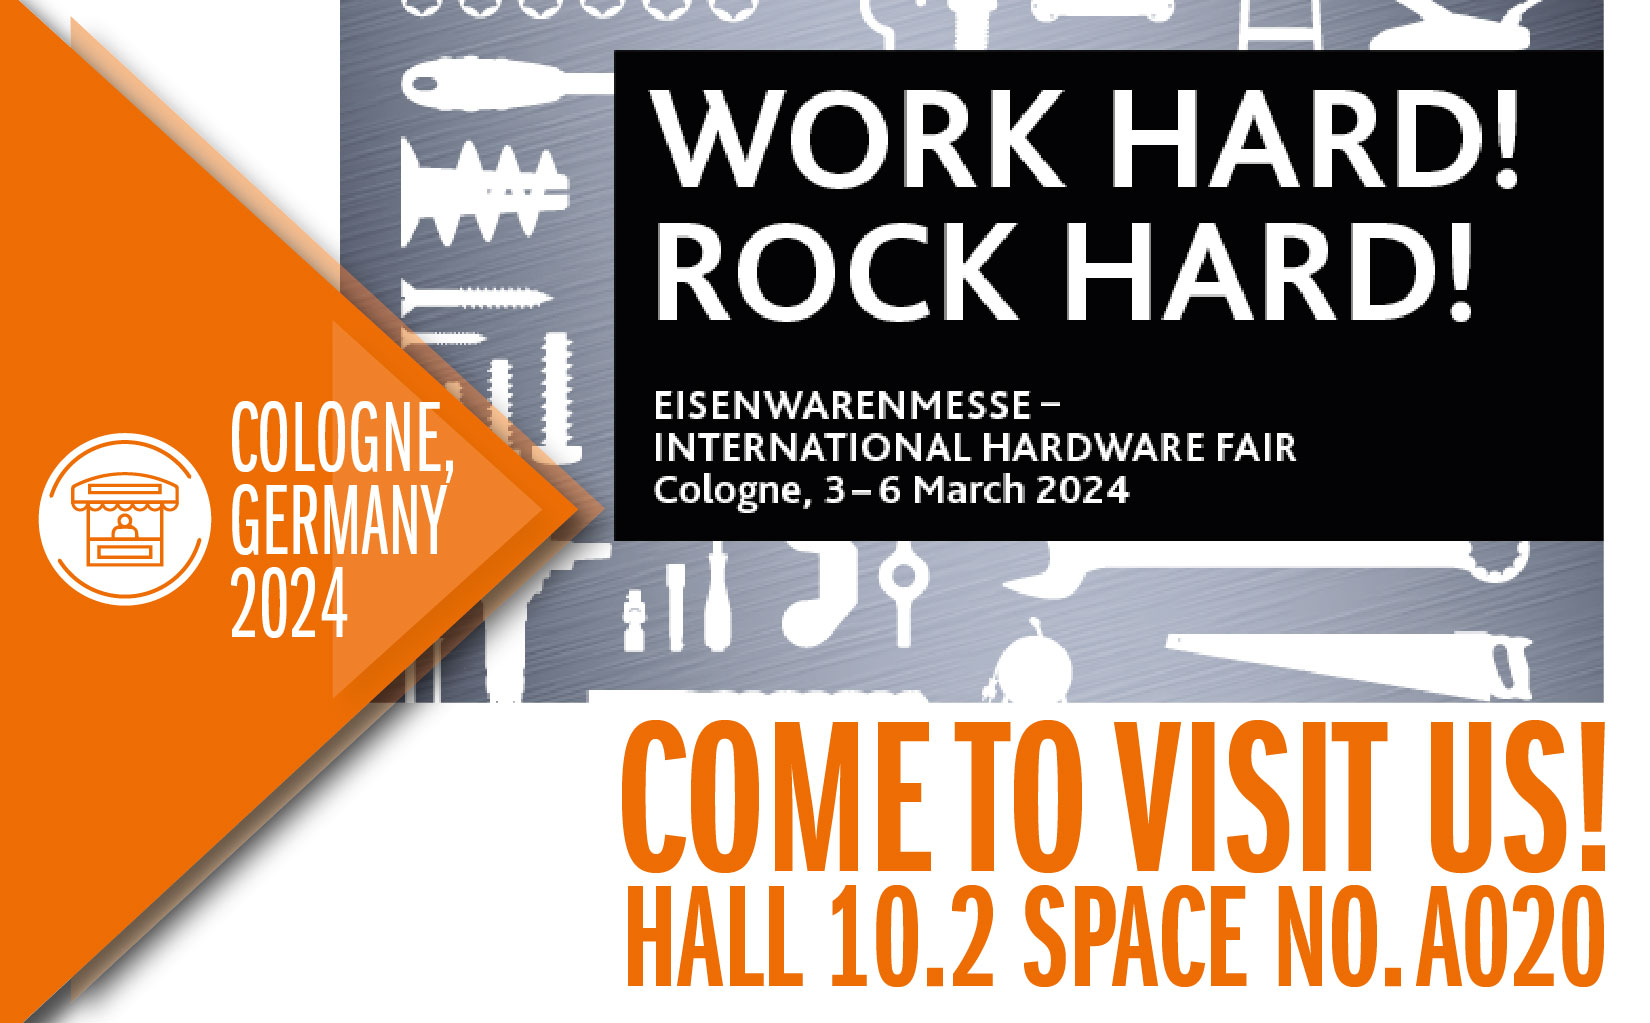 Eisenwarenmesse March 3-6, 2024: Free Entry Pass with CMT Orange Tools